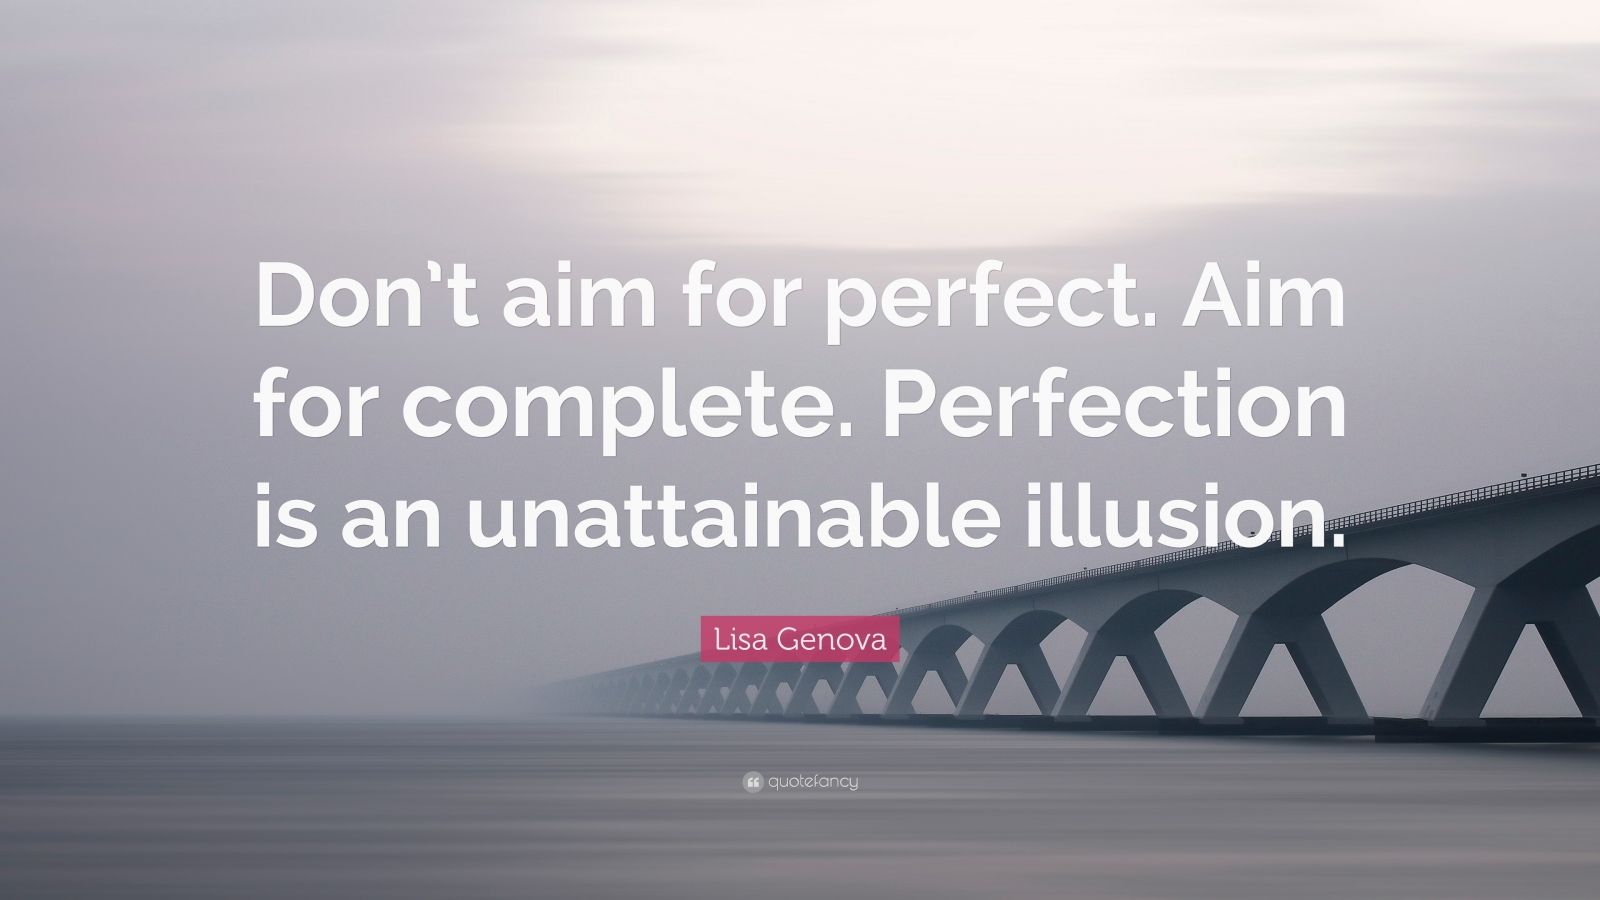 Lisa Genova Quote: “Don’t aim for perfect. Aim for complete. Perfection ...